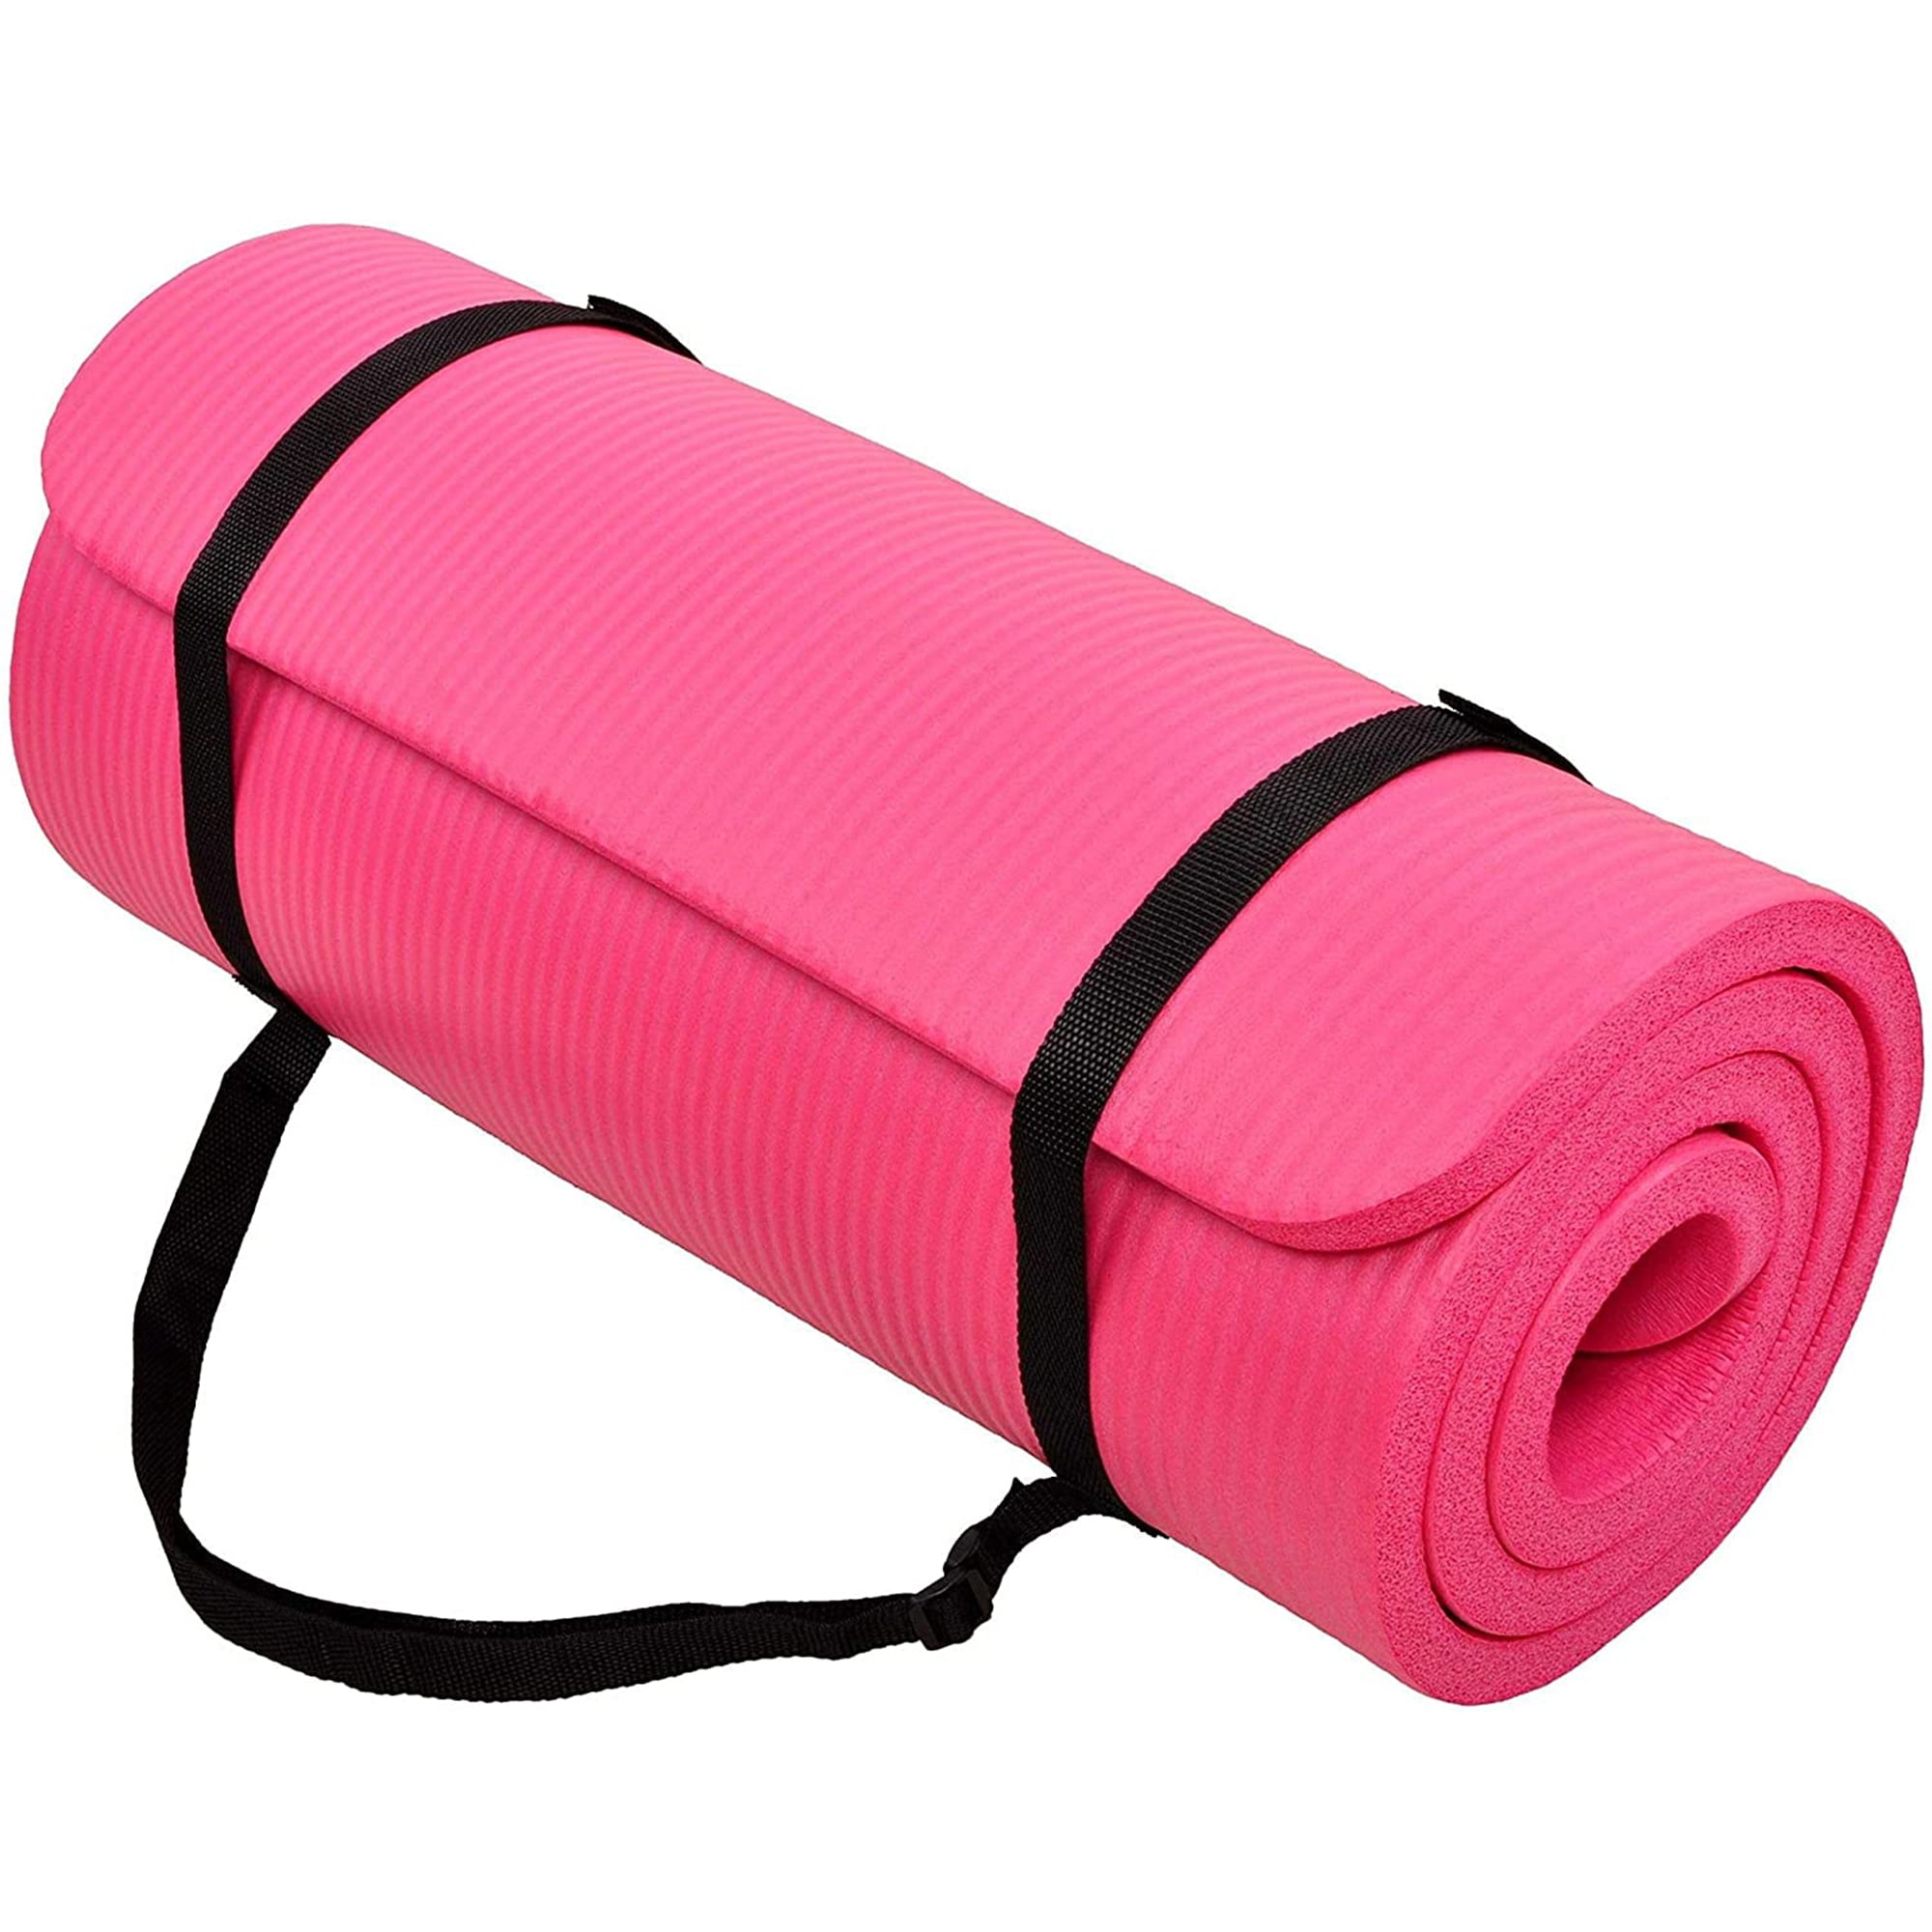 BalanceFrom All-Purpose 1-Inch Extra Thick High Density Anti-Tear Exercise Yoga  Mat with Carrying Strap 